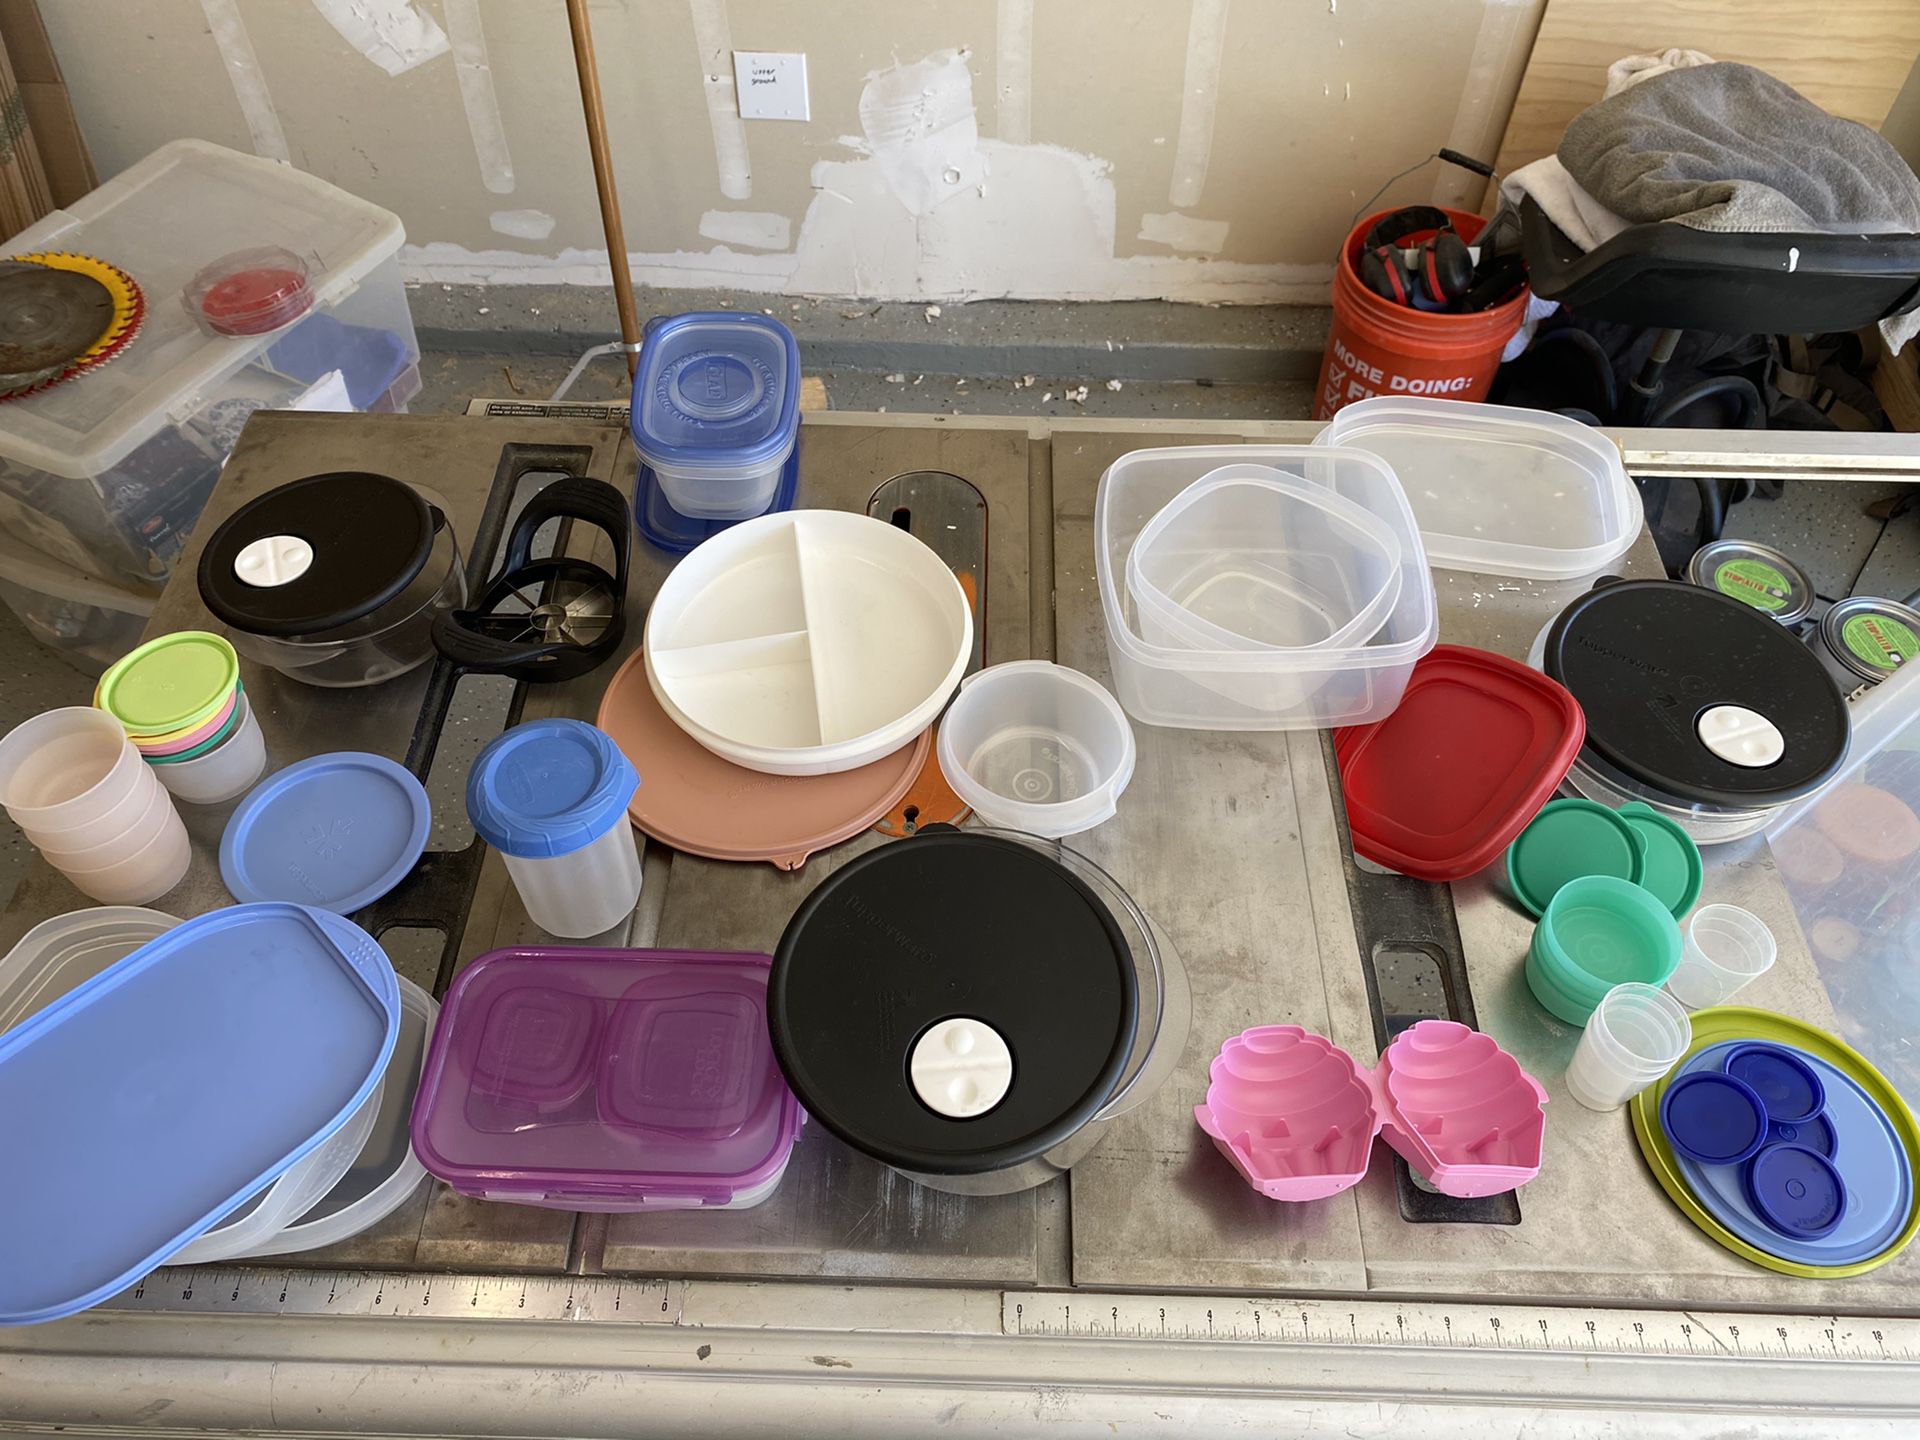 Tupperware and various plastic storage containers